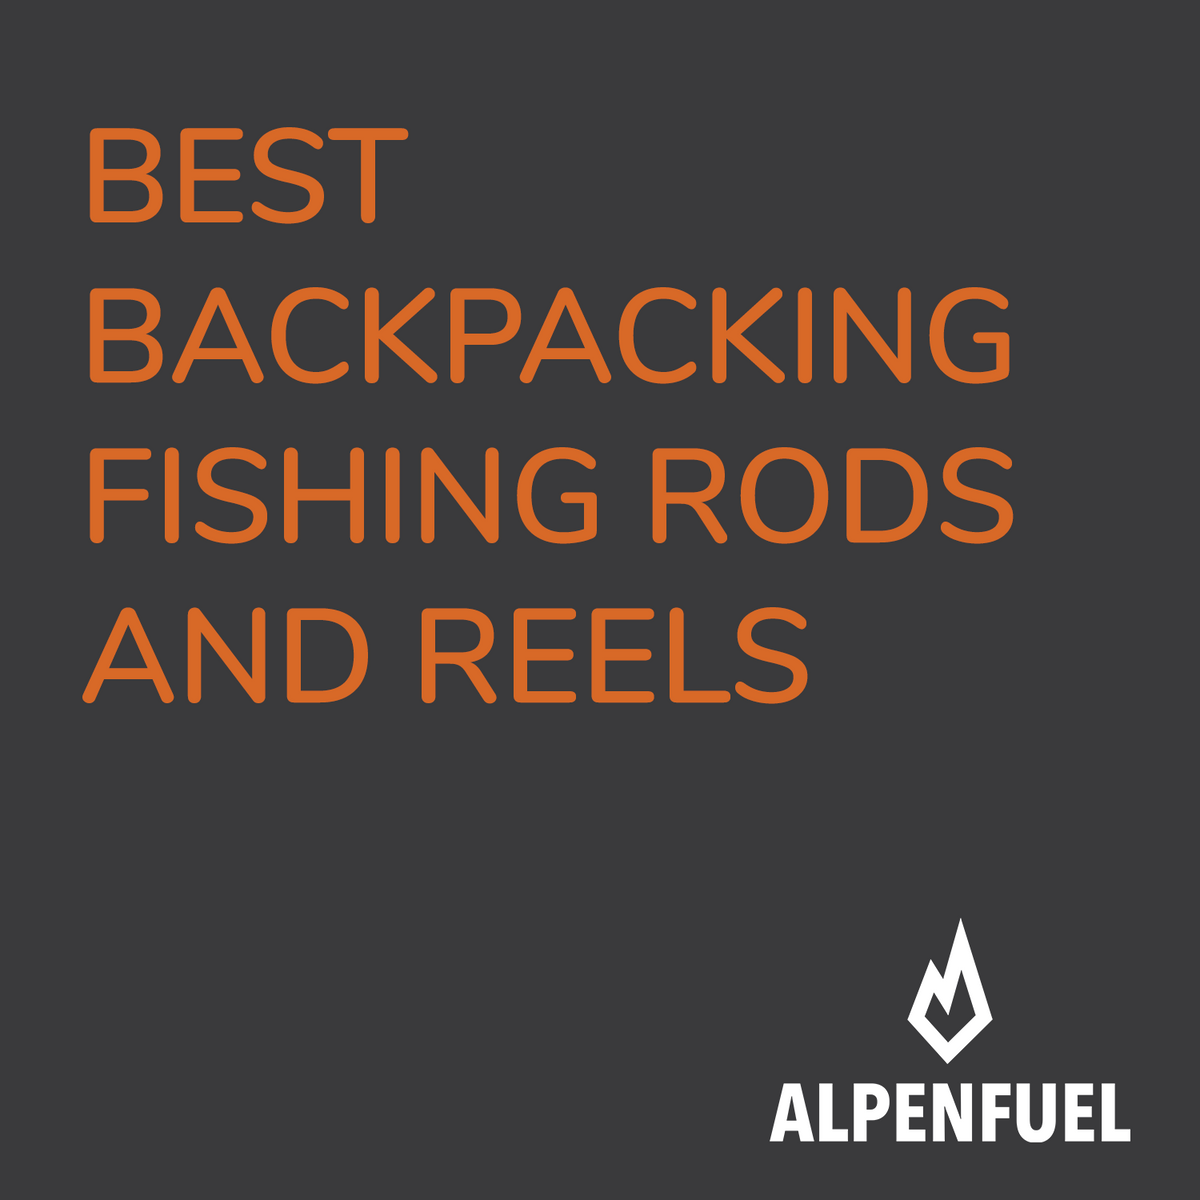 THE BEST BACKPACKING FISHING ROD, Backpacker Spinning Combo